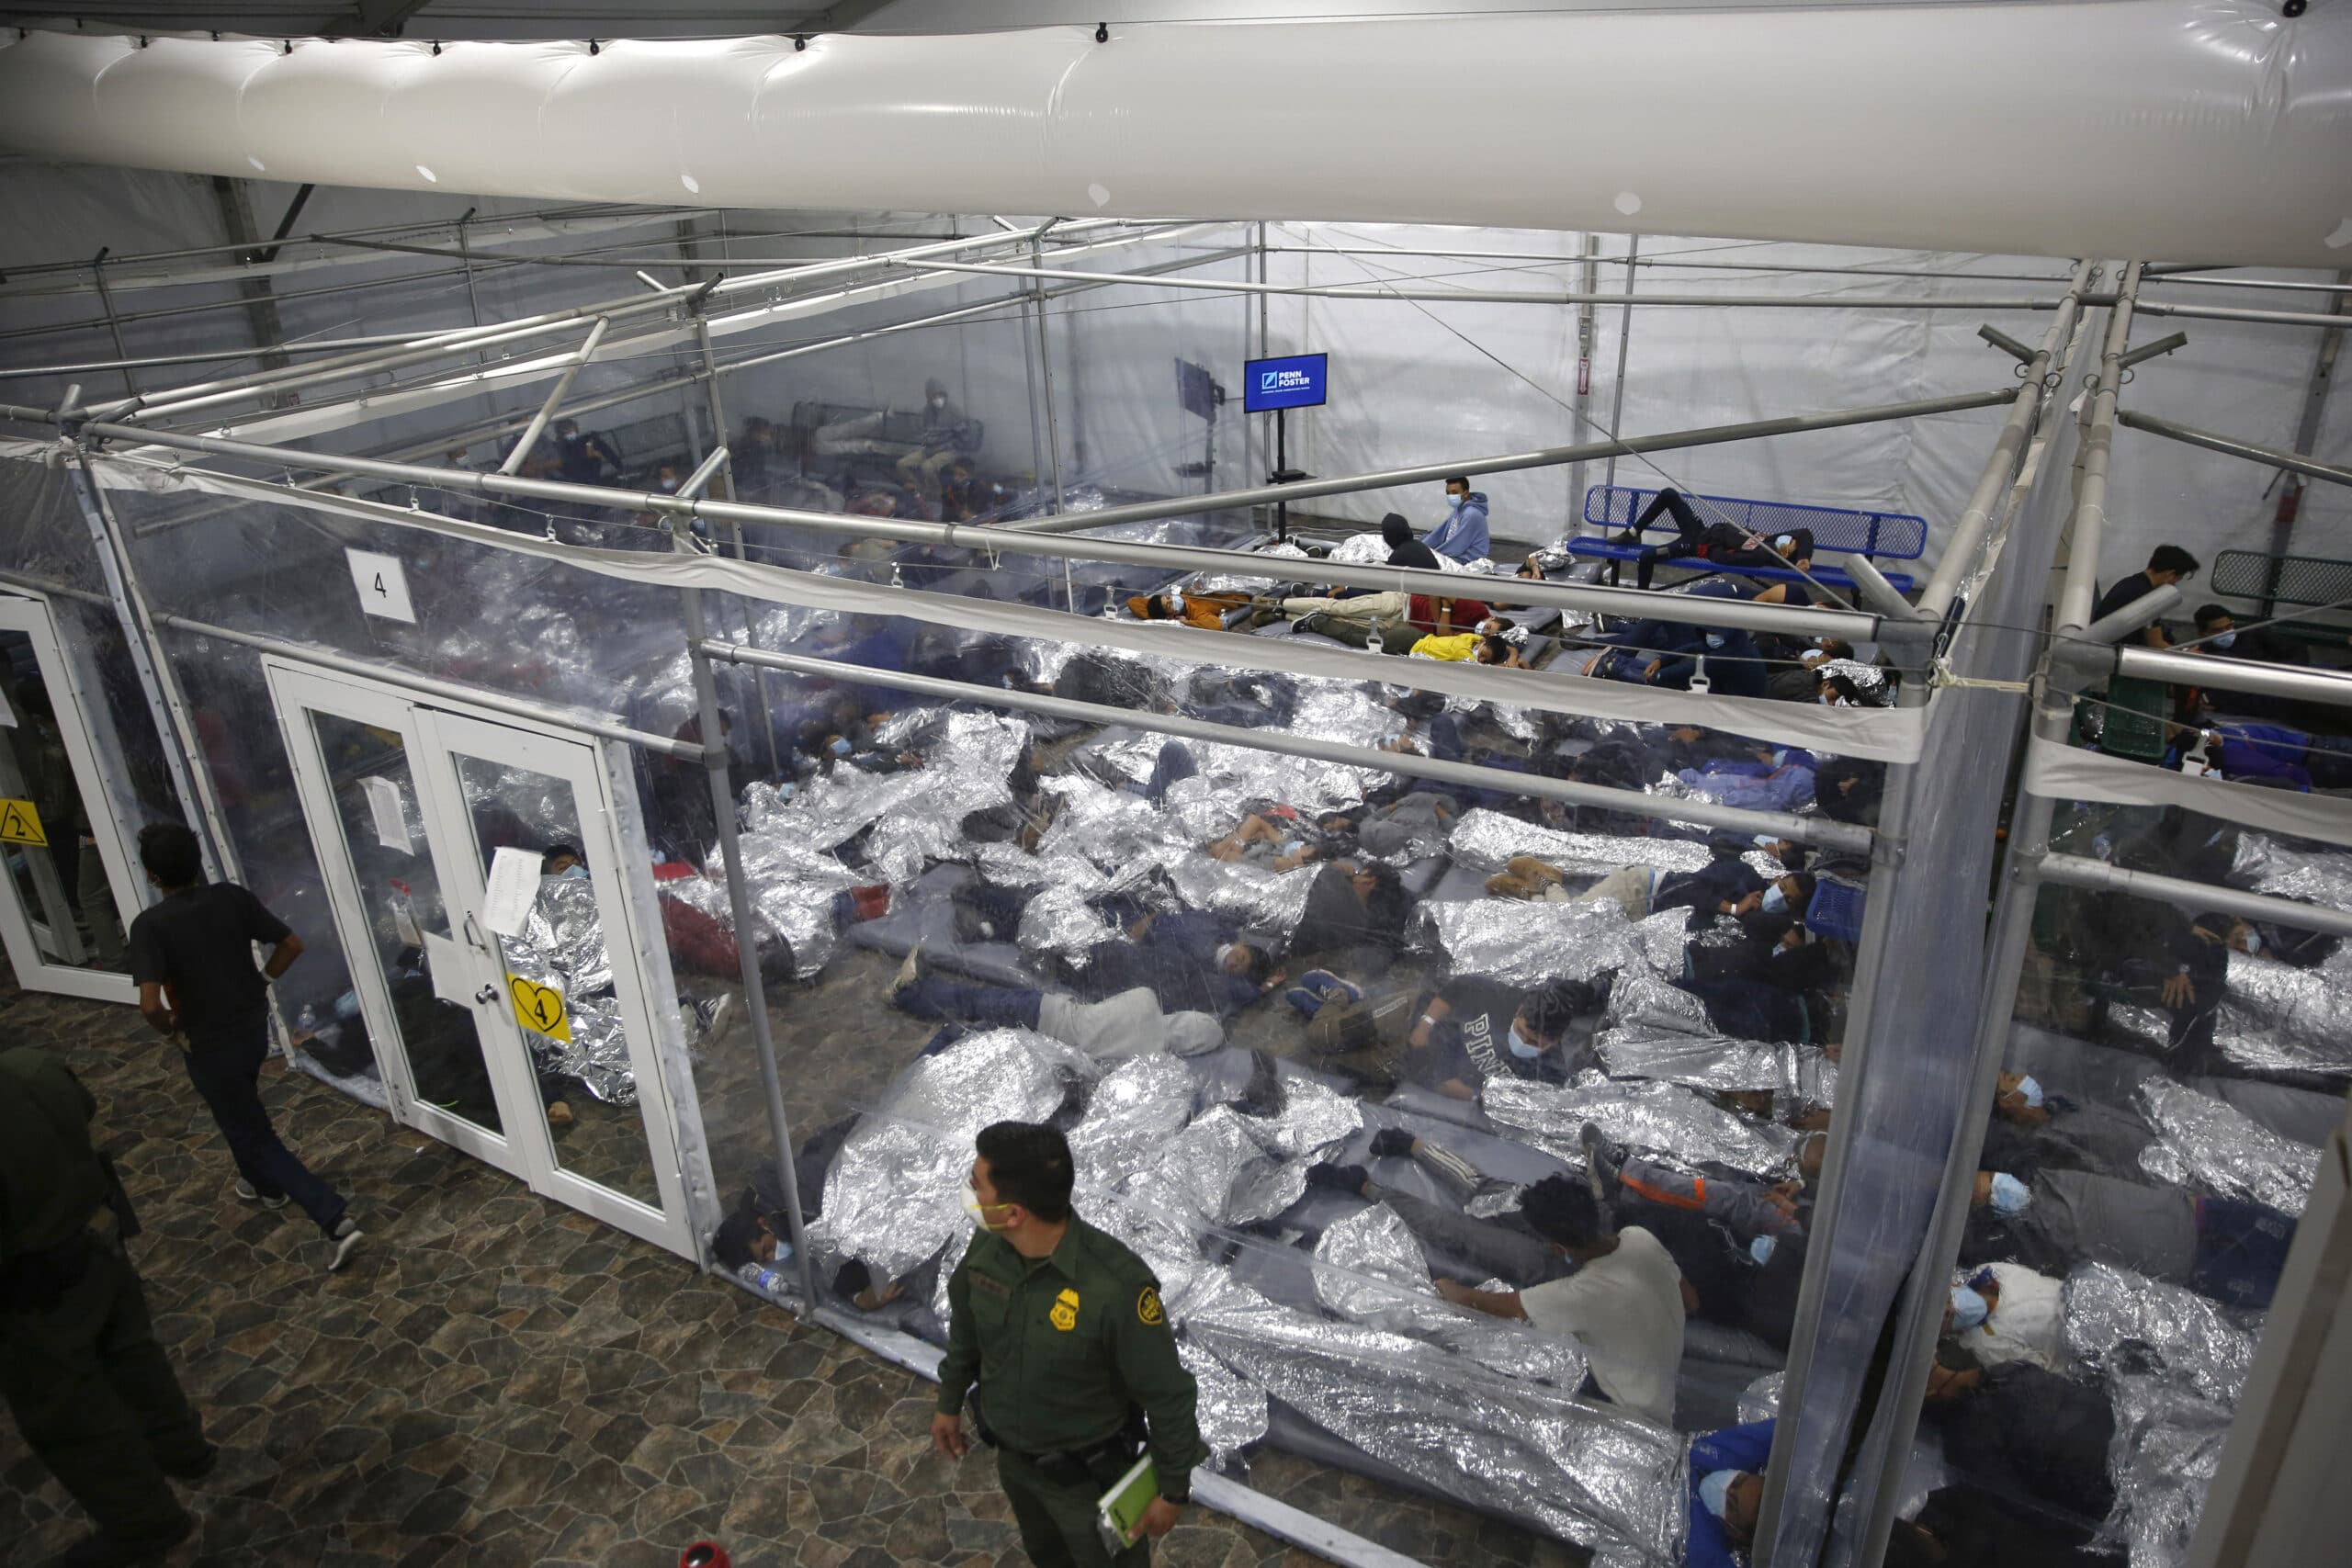 Kids in cages at the border